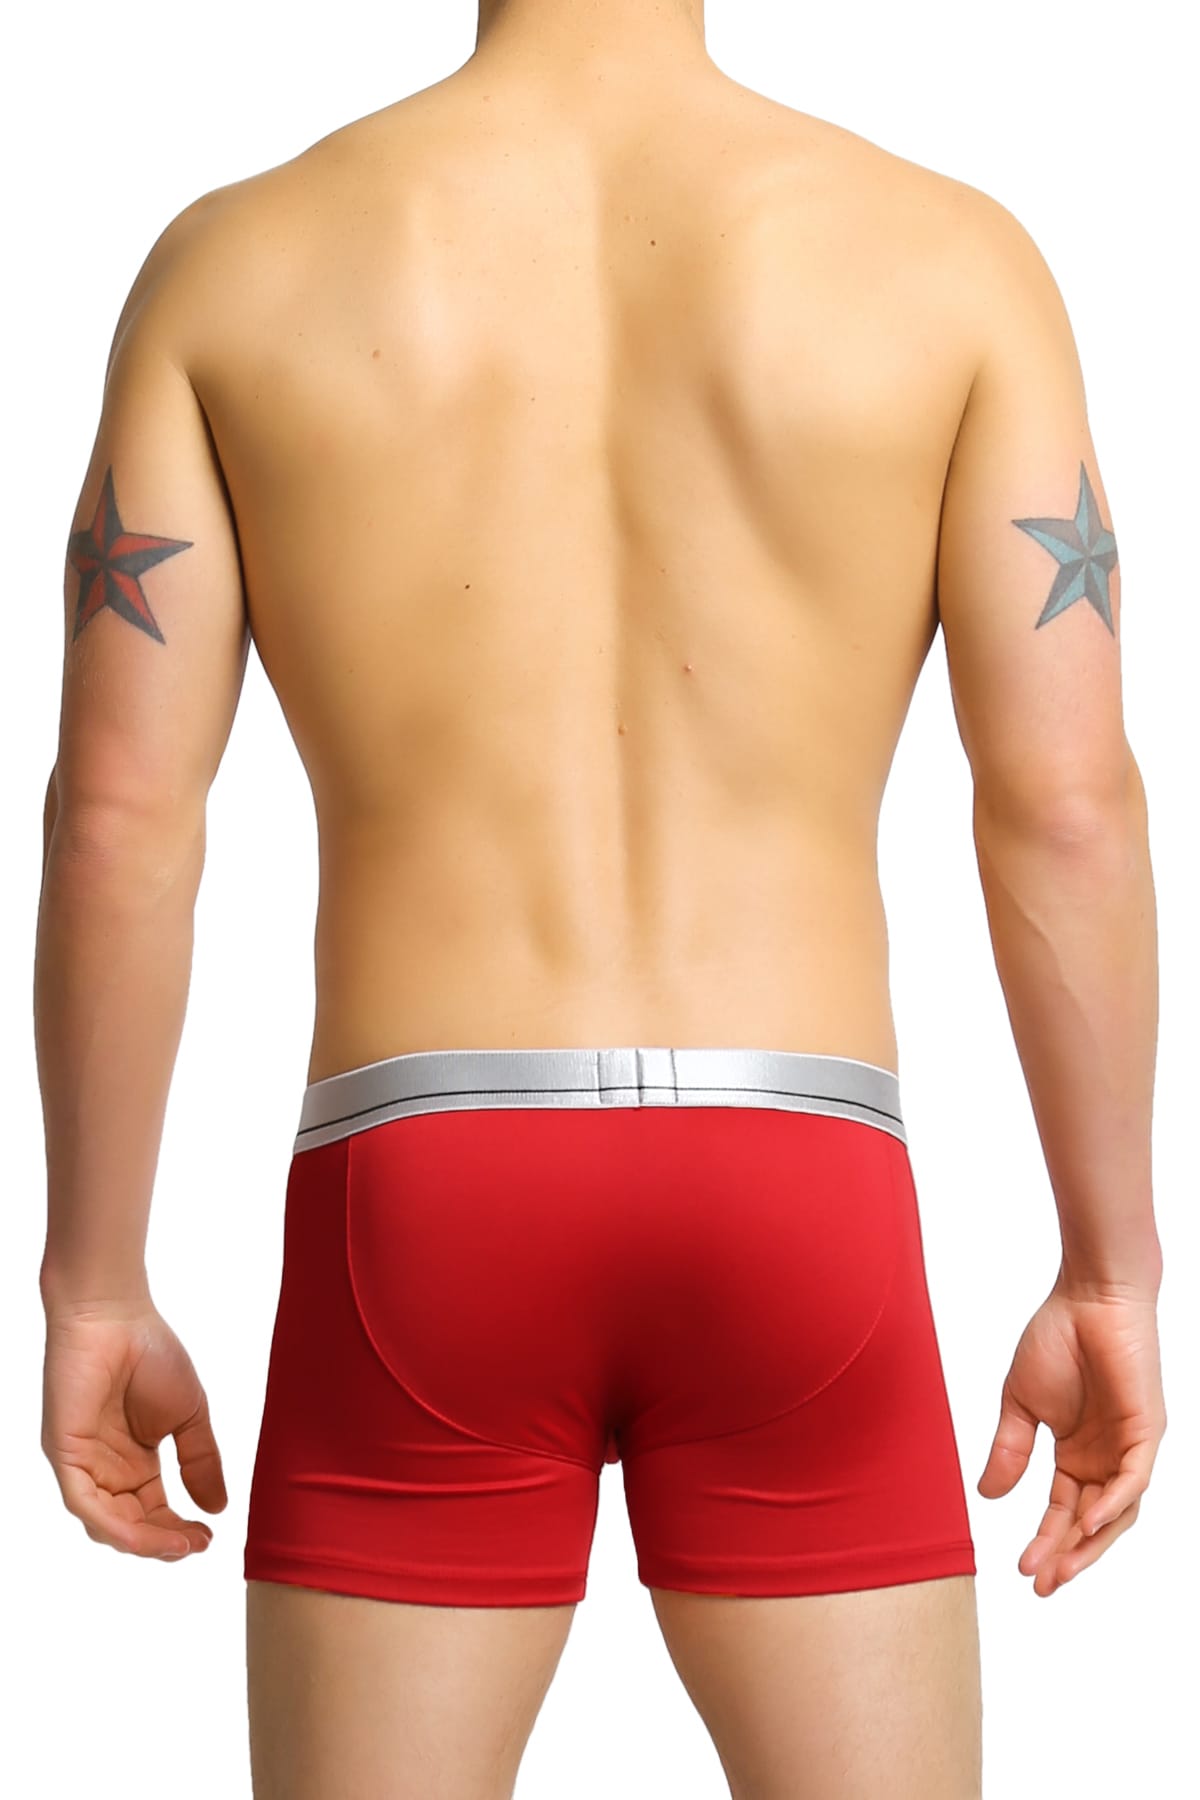 Ken Wroy Red Hot Chili Boxer Brief